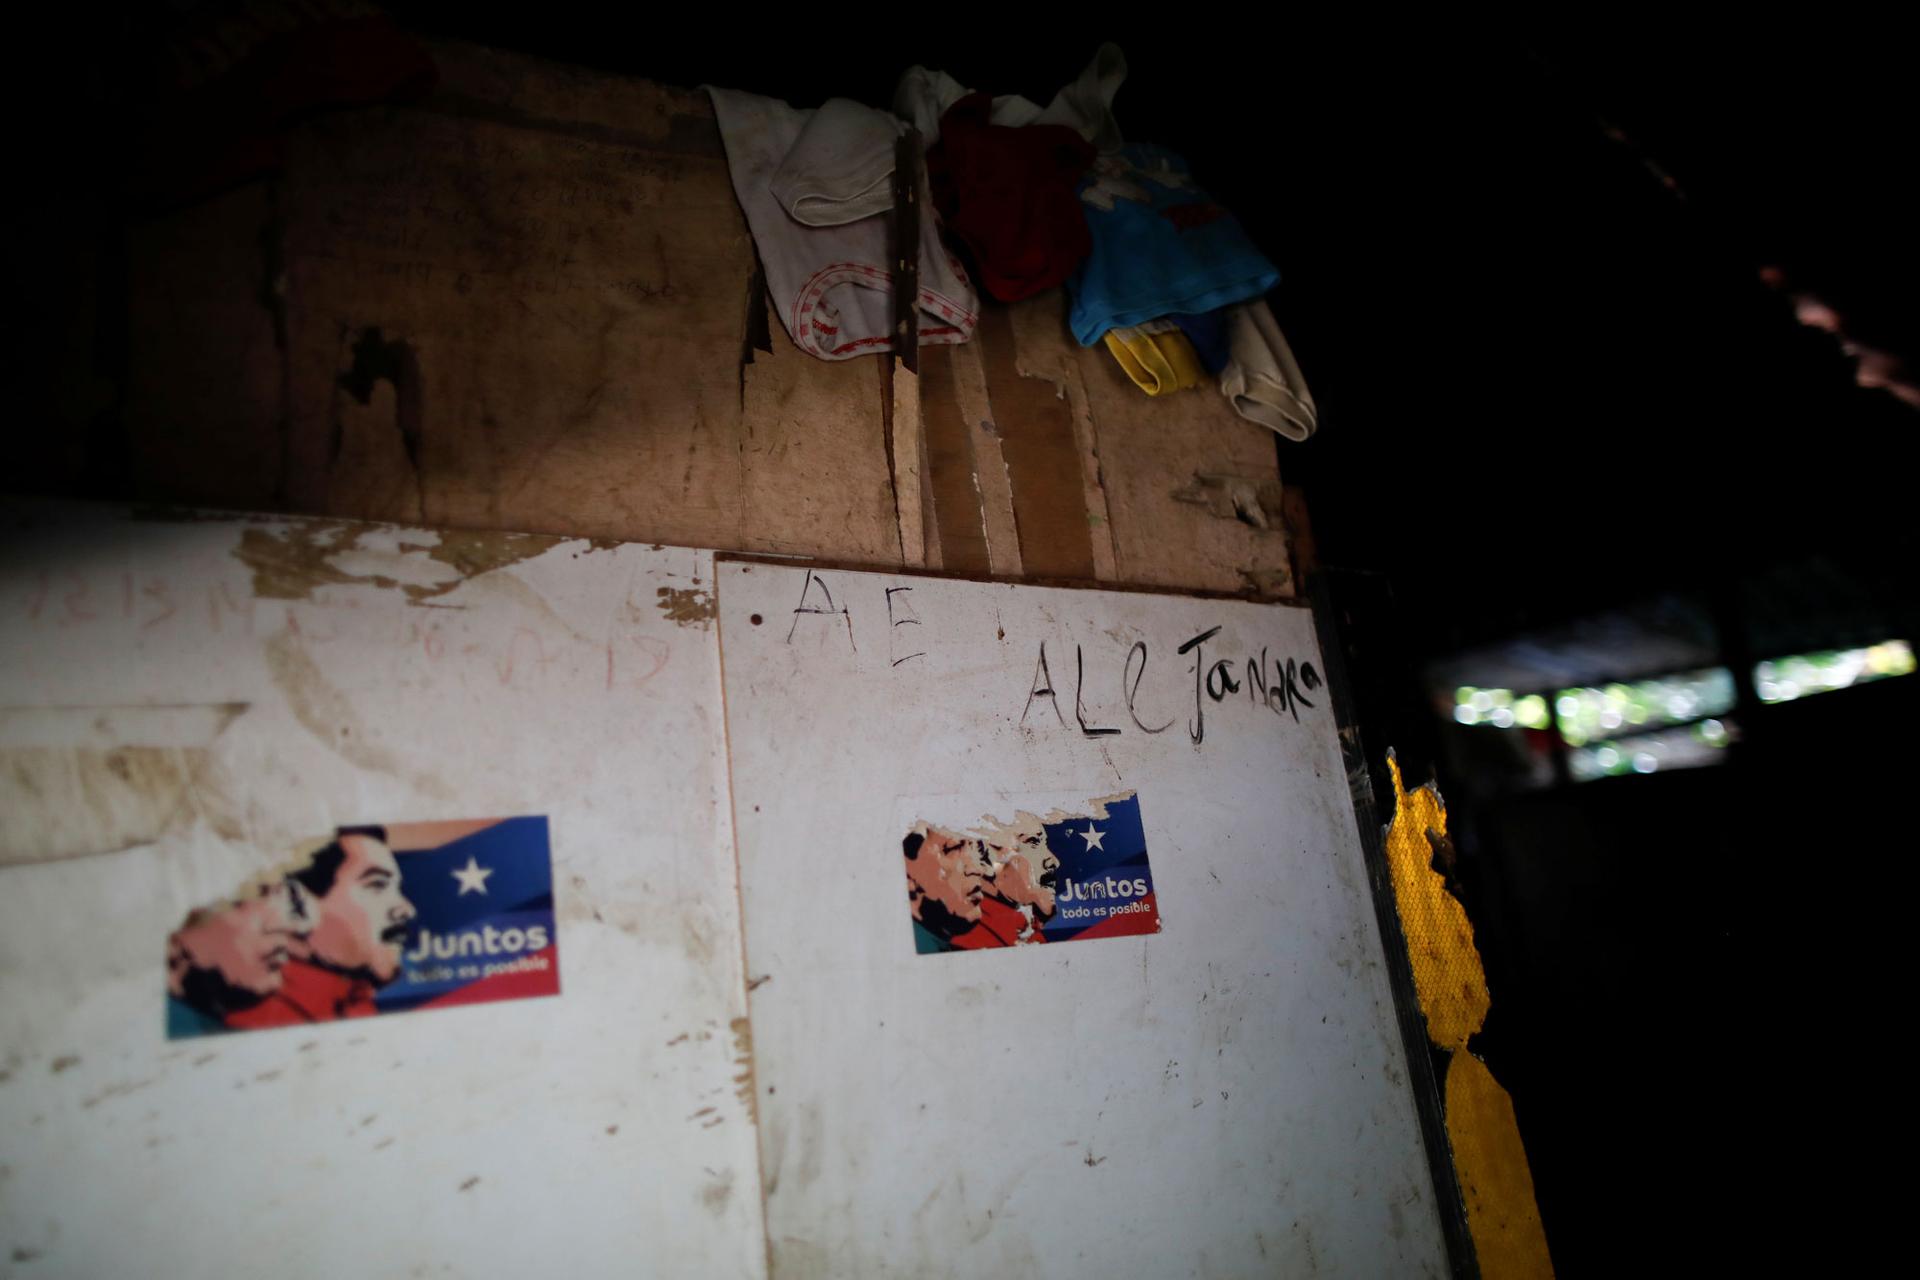 Two partially pulled off stickers are shown with the illustrated faces of Hugo Chavez and Nicolás Maduro.